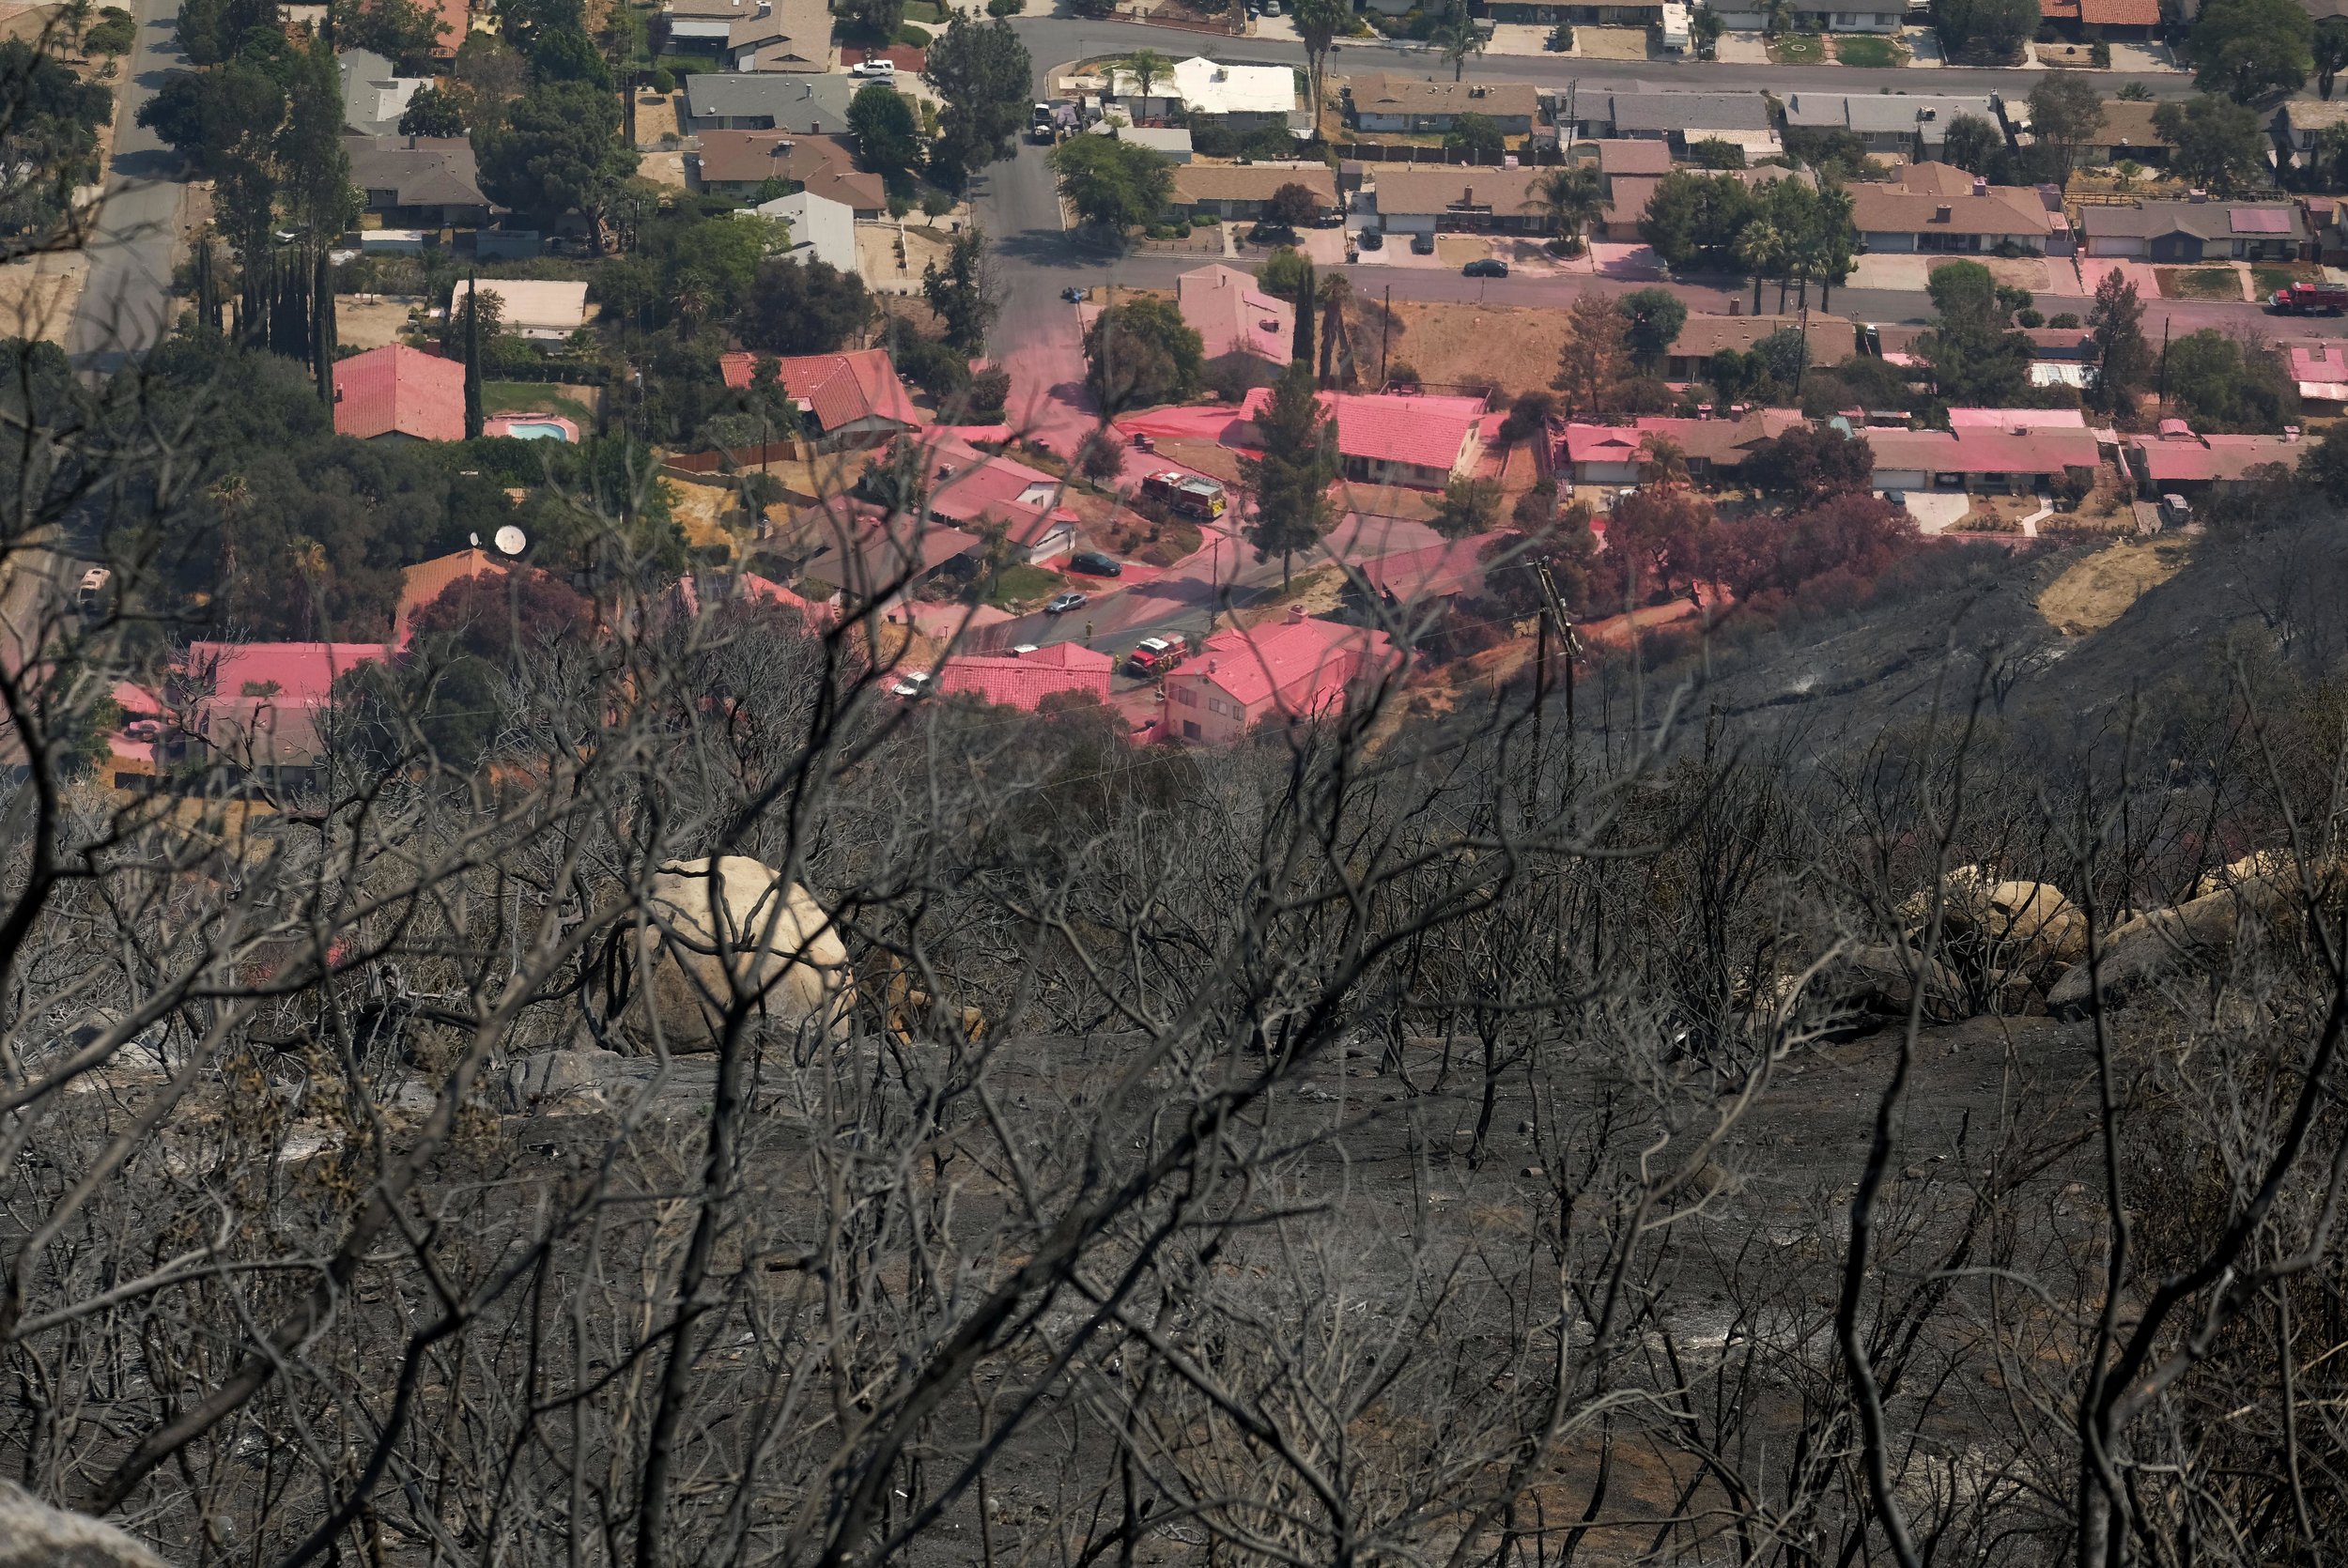  Homes are covered in pink fire retardant at the Holy Fire in Lake Elsinore, California, southeast of Los Angeles, on August 11, 2018. The fire has burned 21,473 acres and was 29 percent contained as of 8:30 a.m. Saturday, according to the Cleveland 